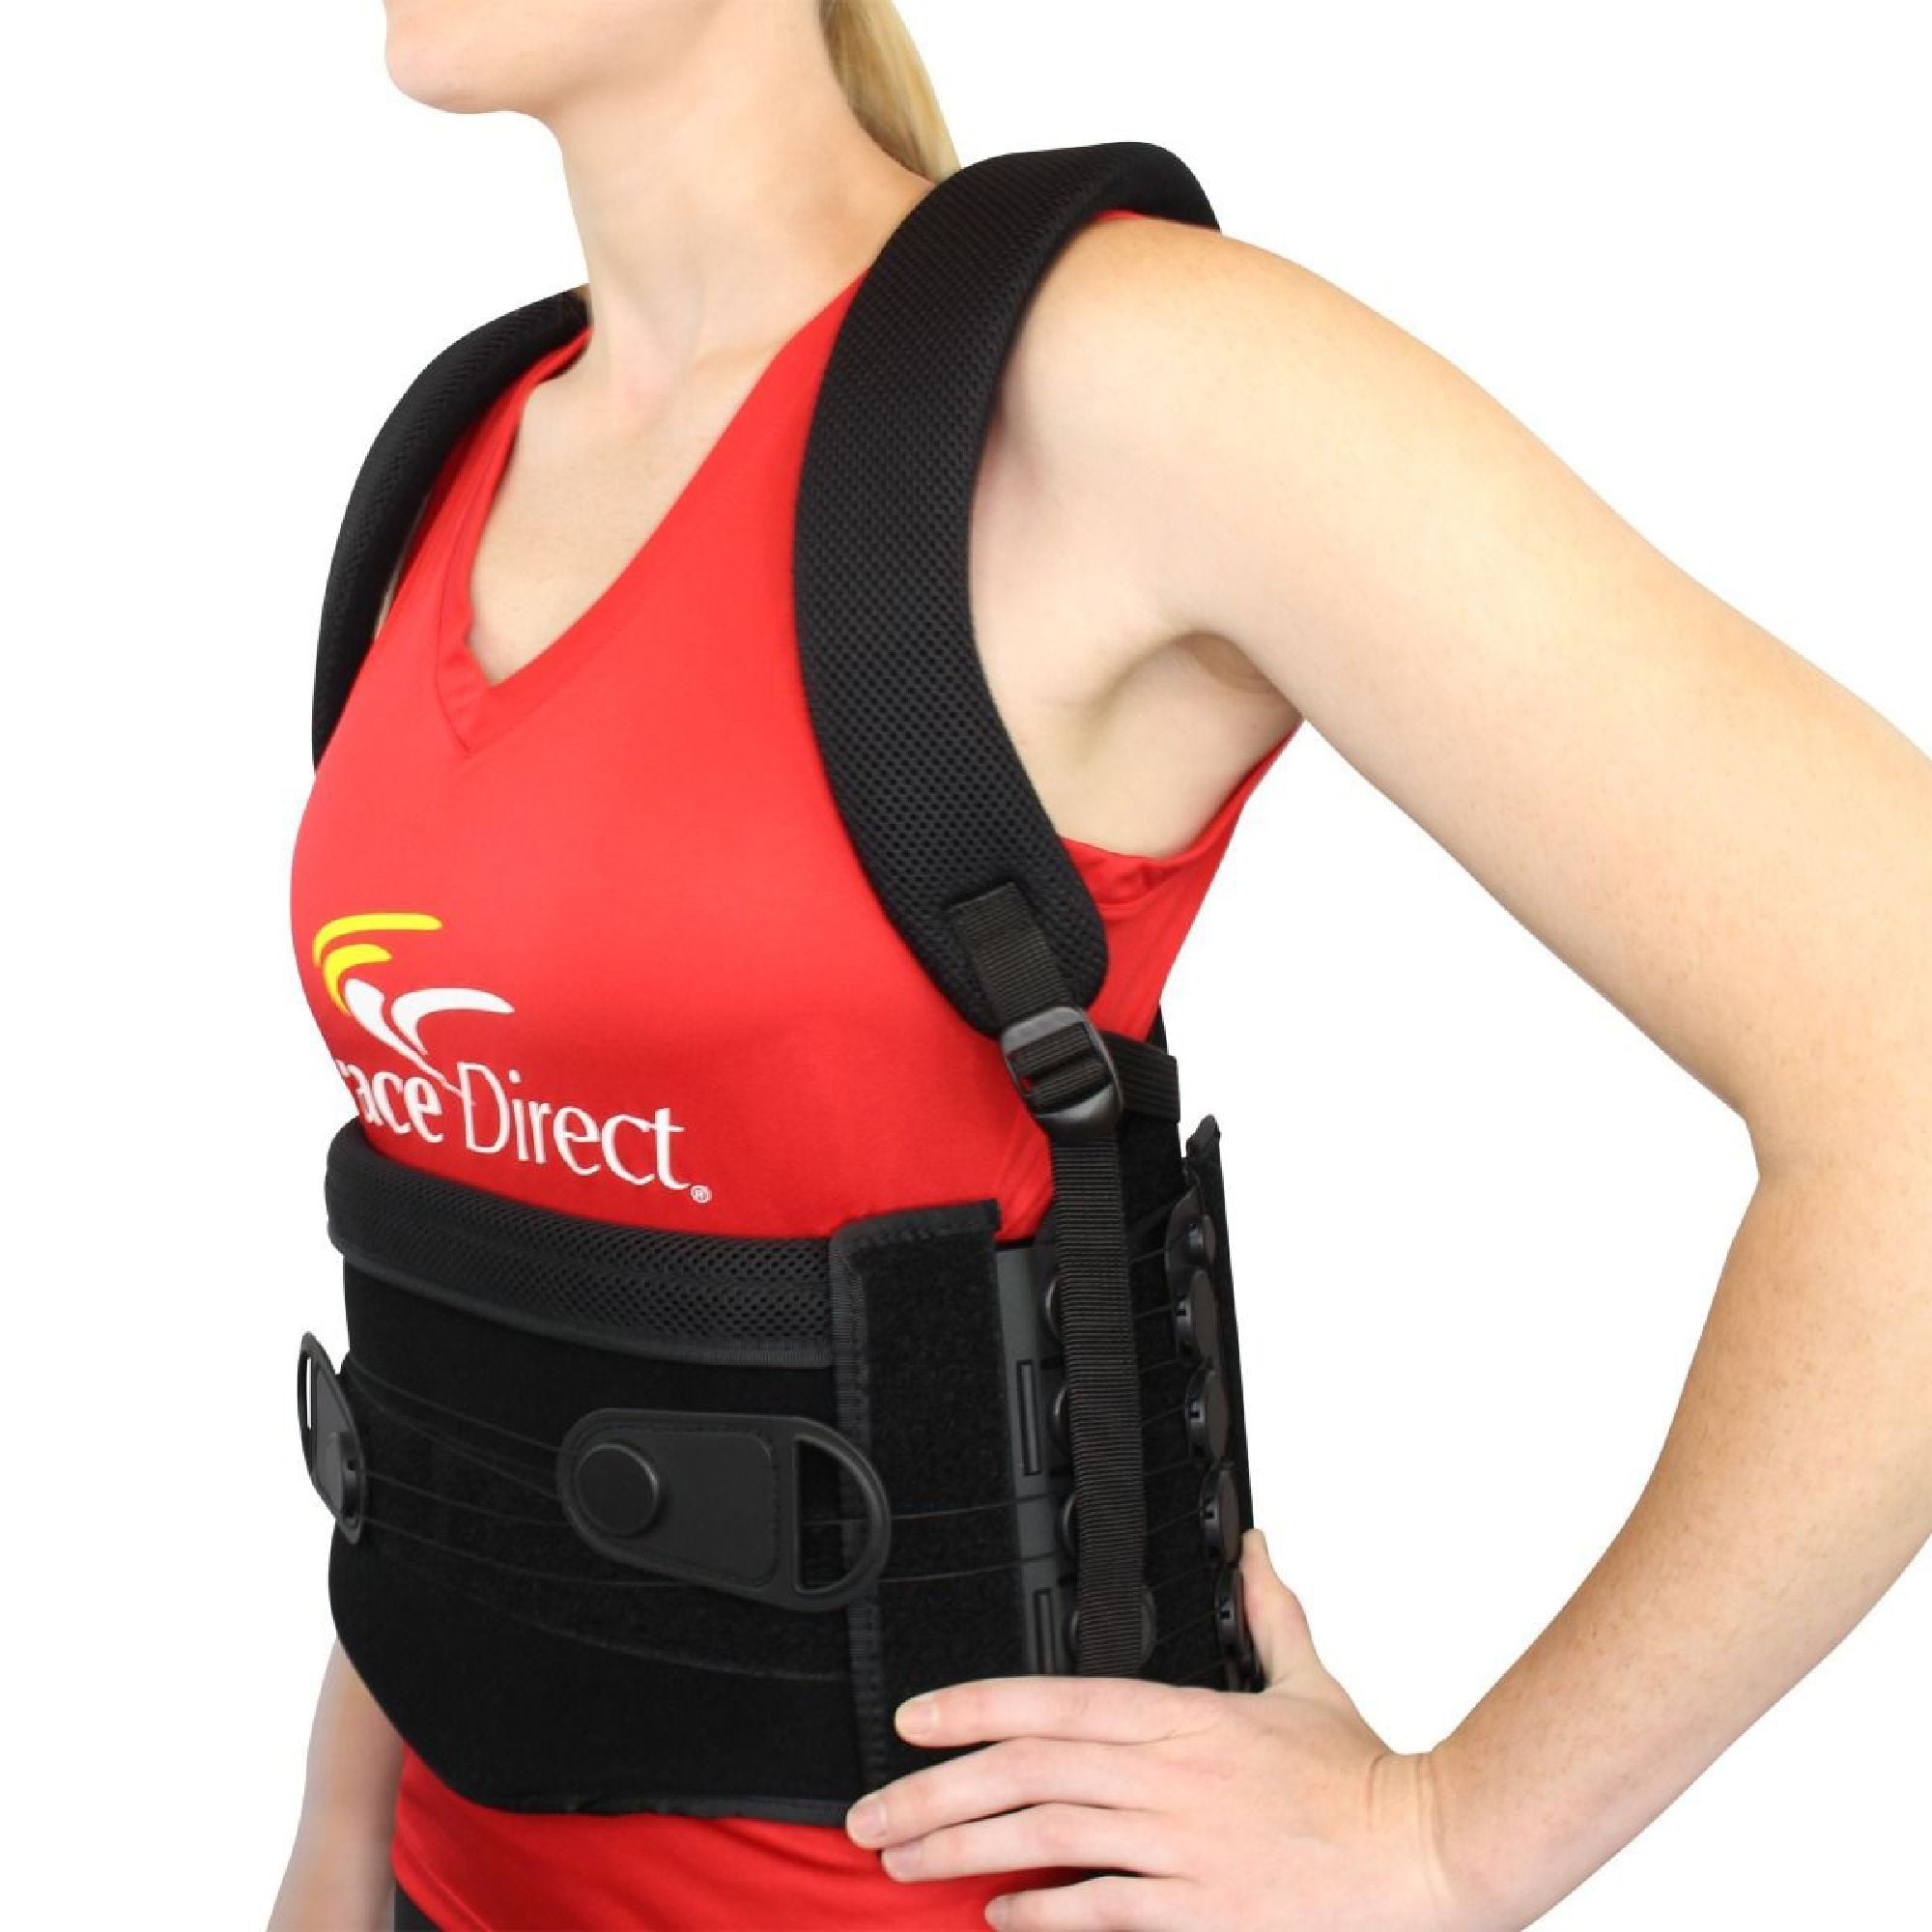 Buy 5 get 1 FREE Air A Med Premium Back Brace L0650 Universal Size